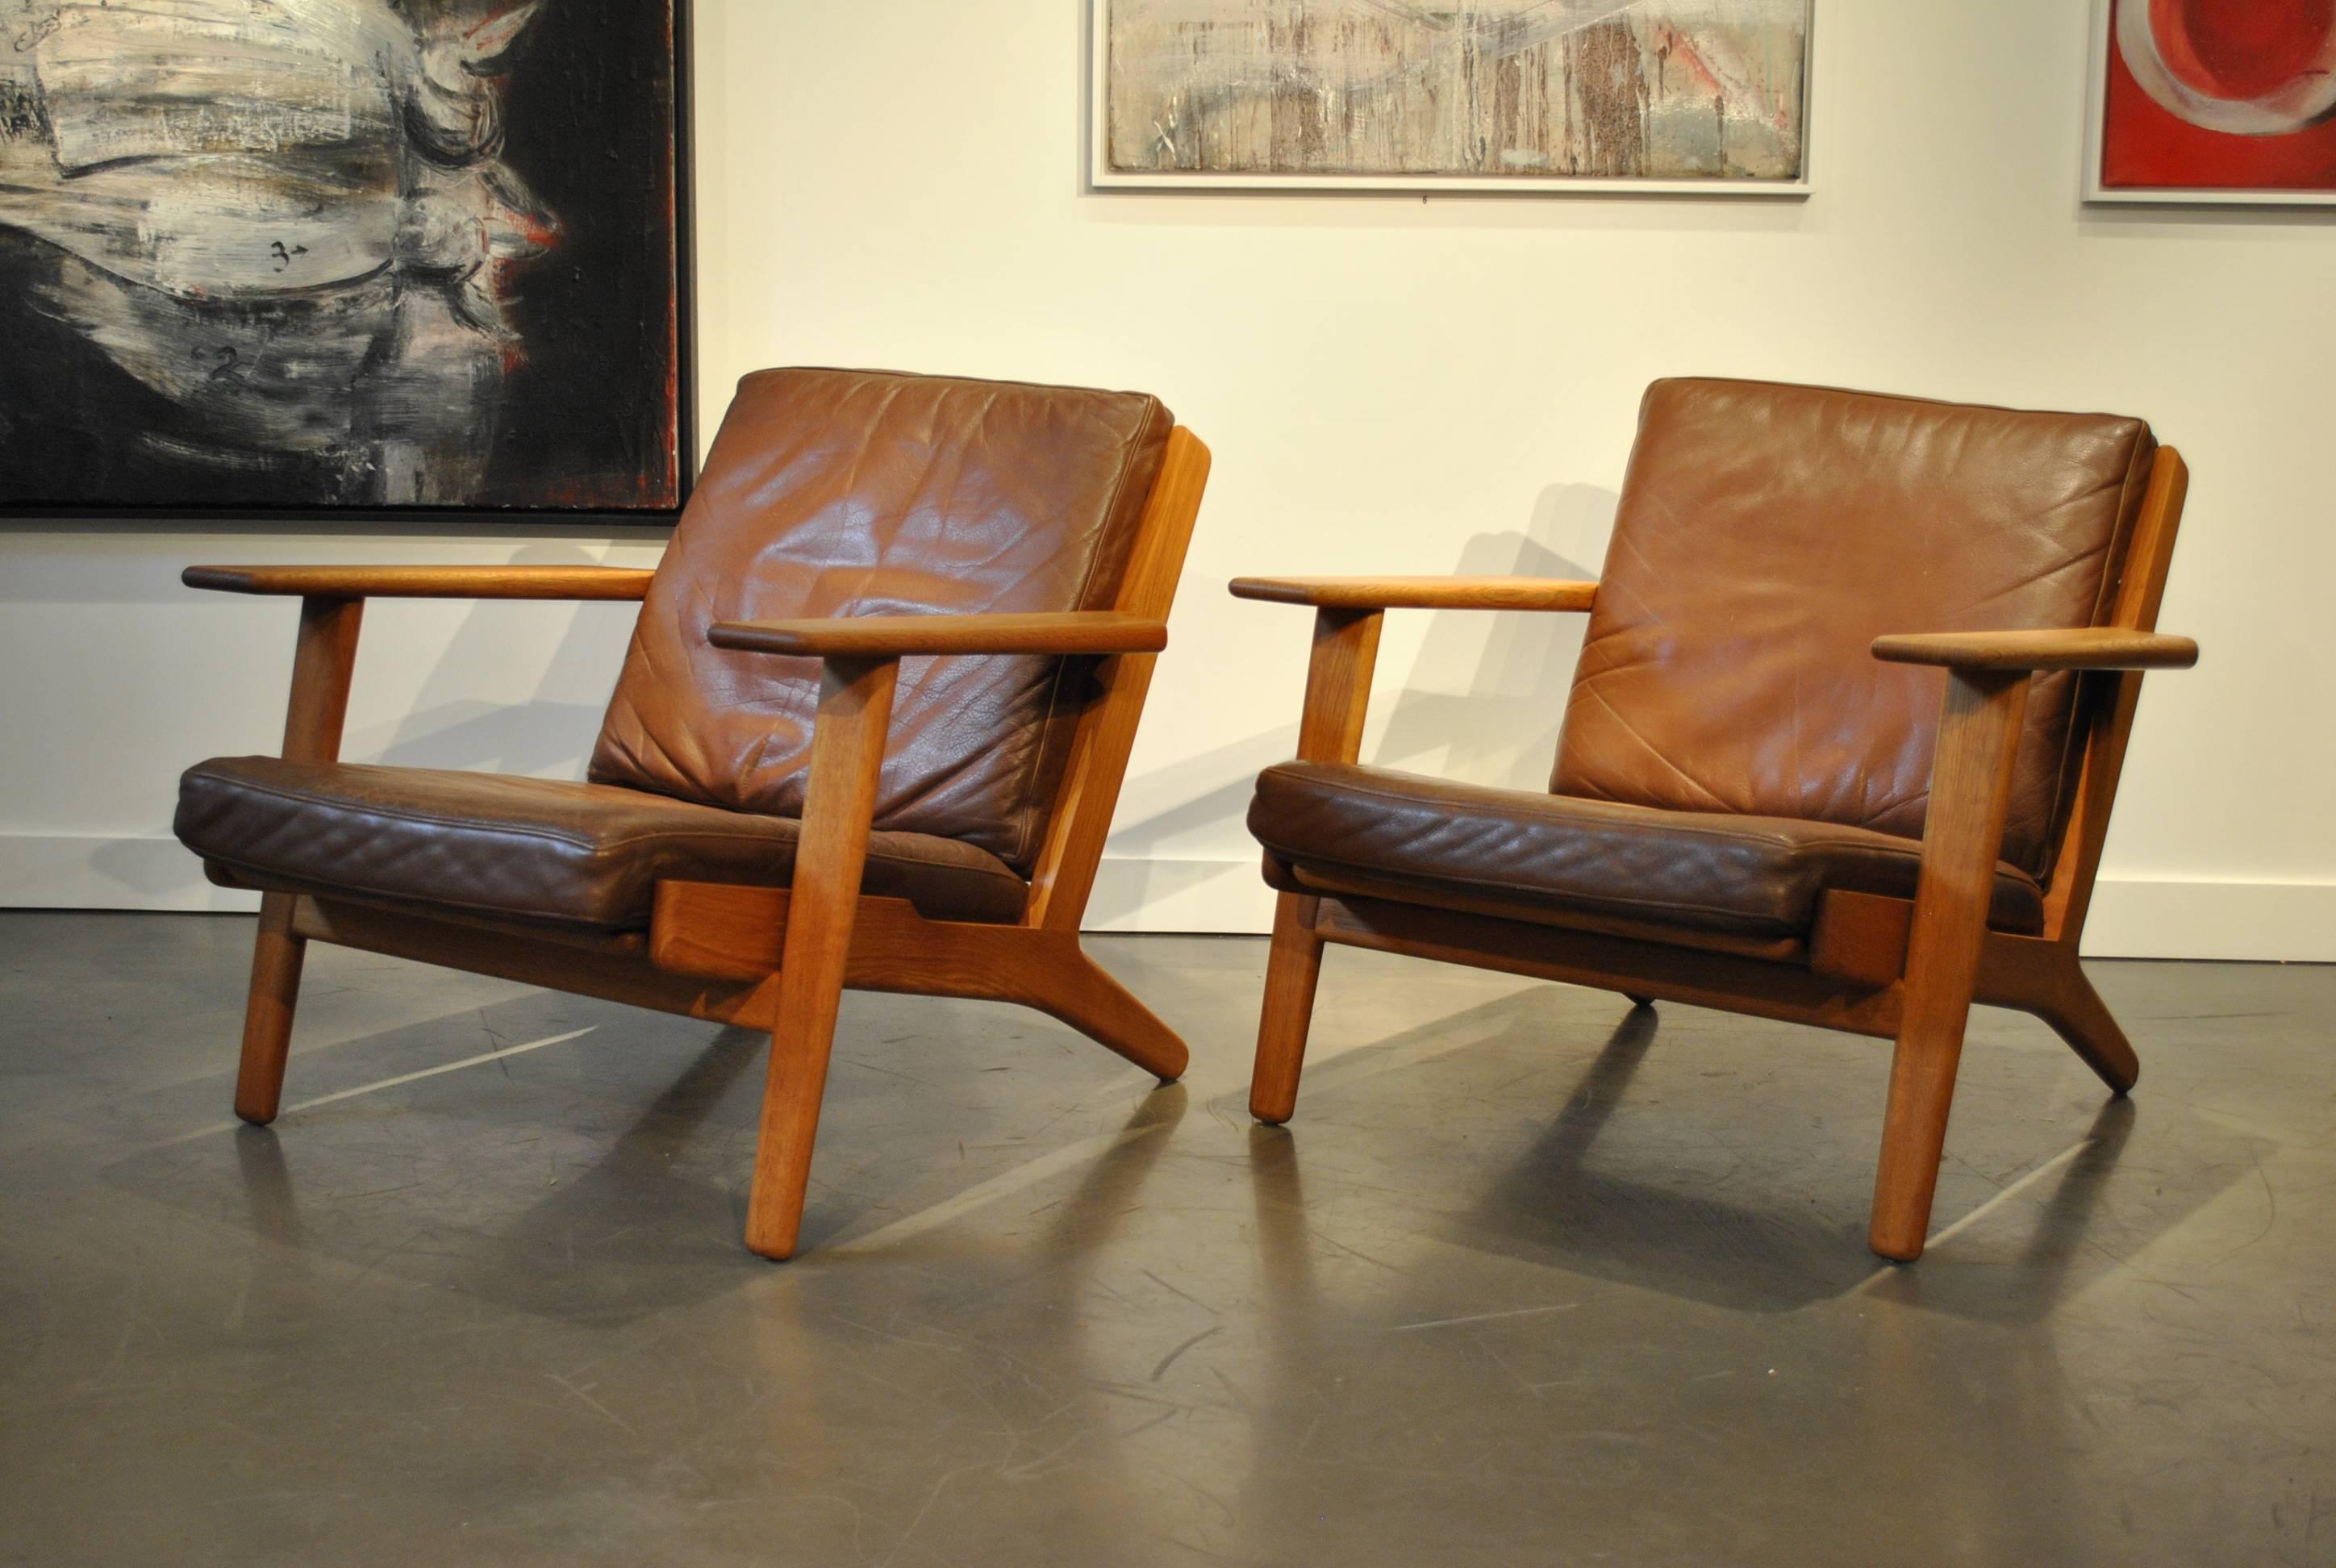 Early light European oak version of Hans J Wegners ge290 design for GETAMA. Produced in Denmark, circa 1955. A Classic and timeless design. Sympathetically refurbished - Repolished frames with patinated light/mid brown leather upholstery. Original